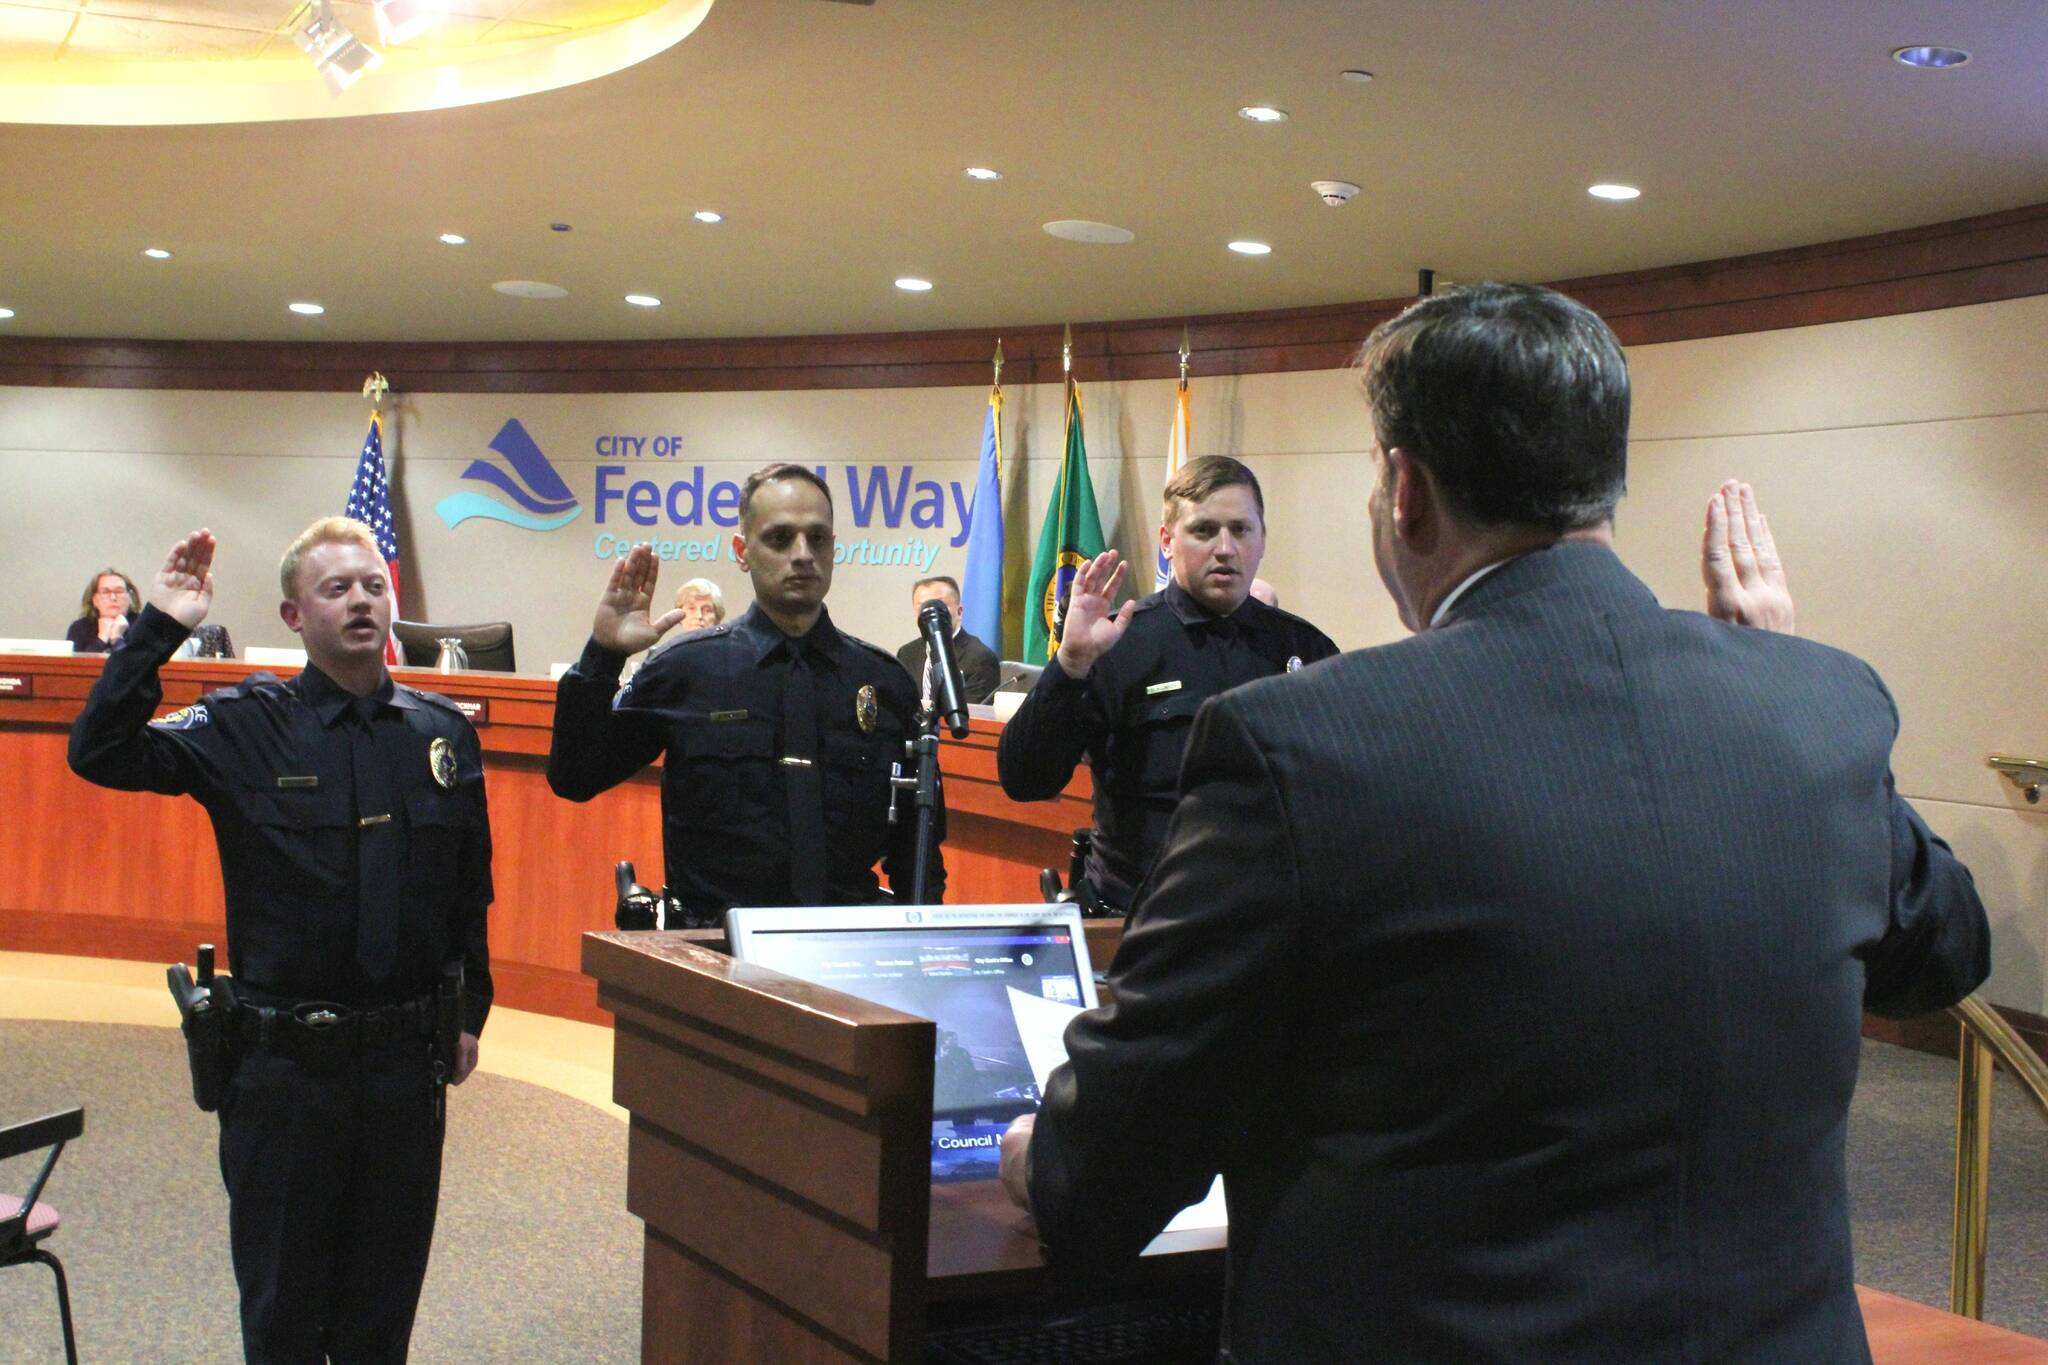 Alex Bruell / The Mirror
Mayor Jim Ferrell administers the oath of office to new Federal Way PD officers (from left to right) David Pollock, Adnan Ihsan and David Agapov during the April 18 City Council meeting.